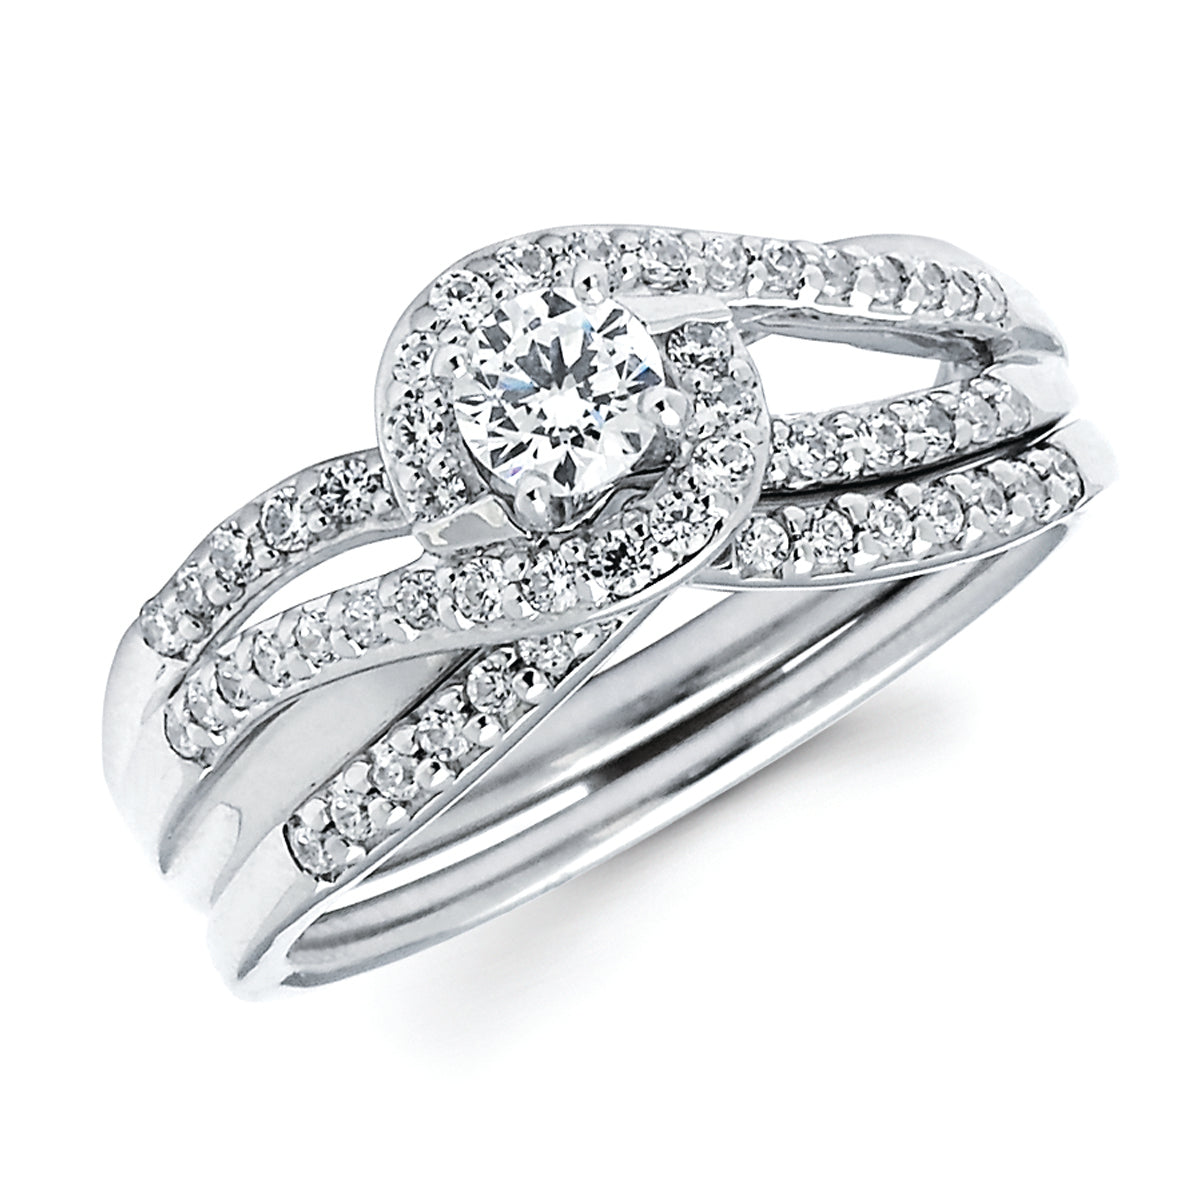 Modern Bridal: 1/4 Ctw. Diamond Semi Mount available for 1/4 Ct. Round Center Diamond in 14K Gold